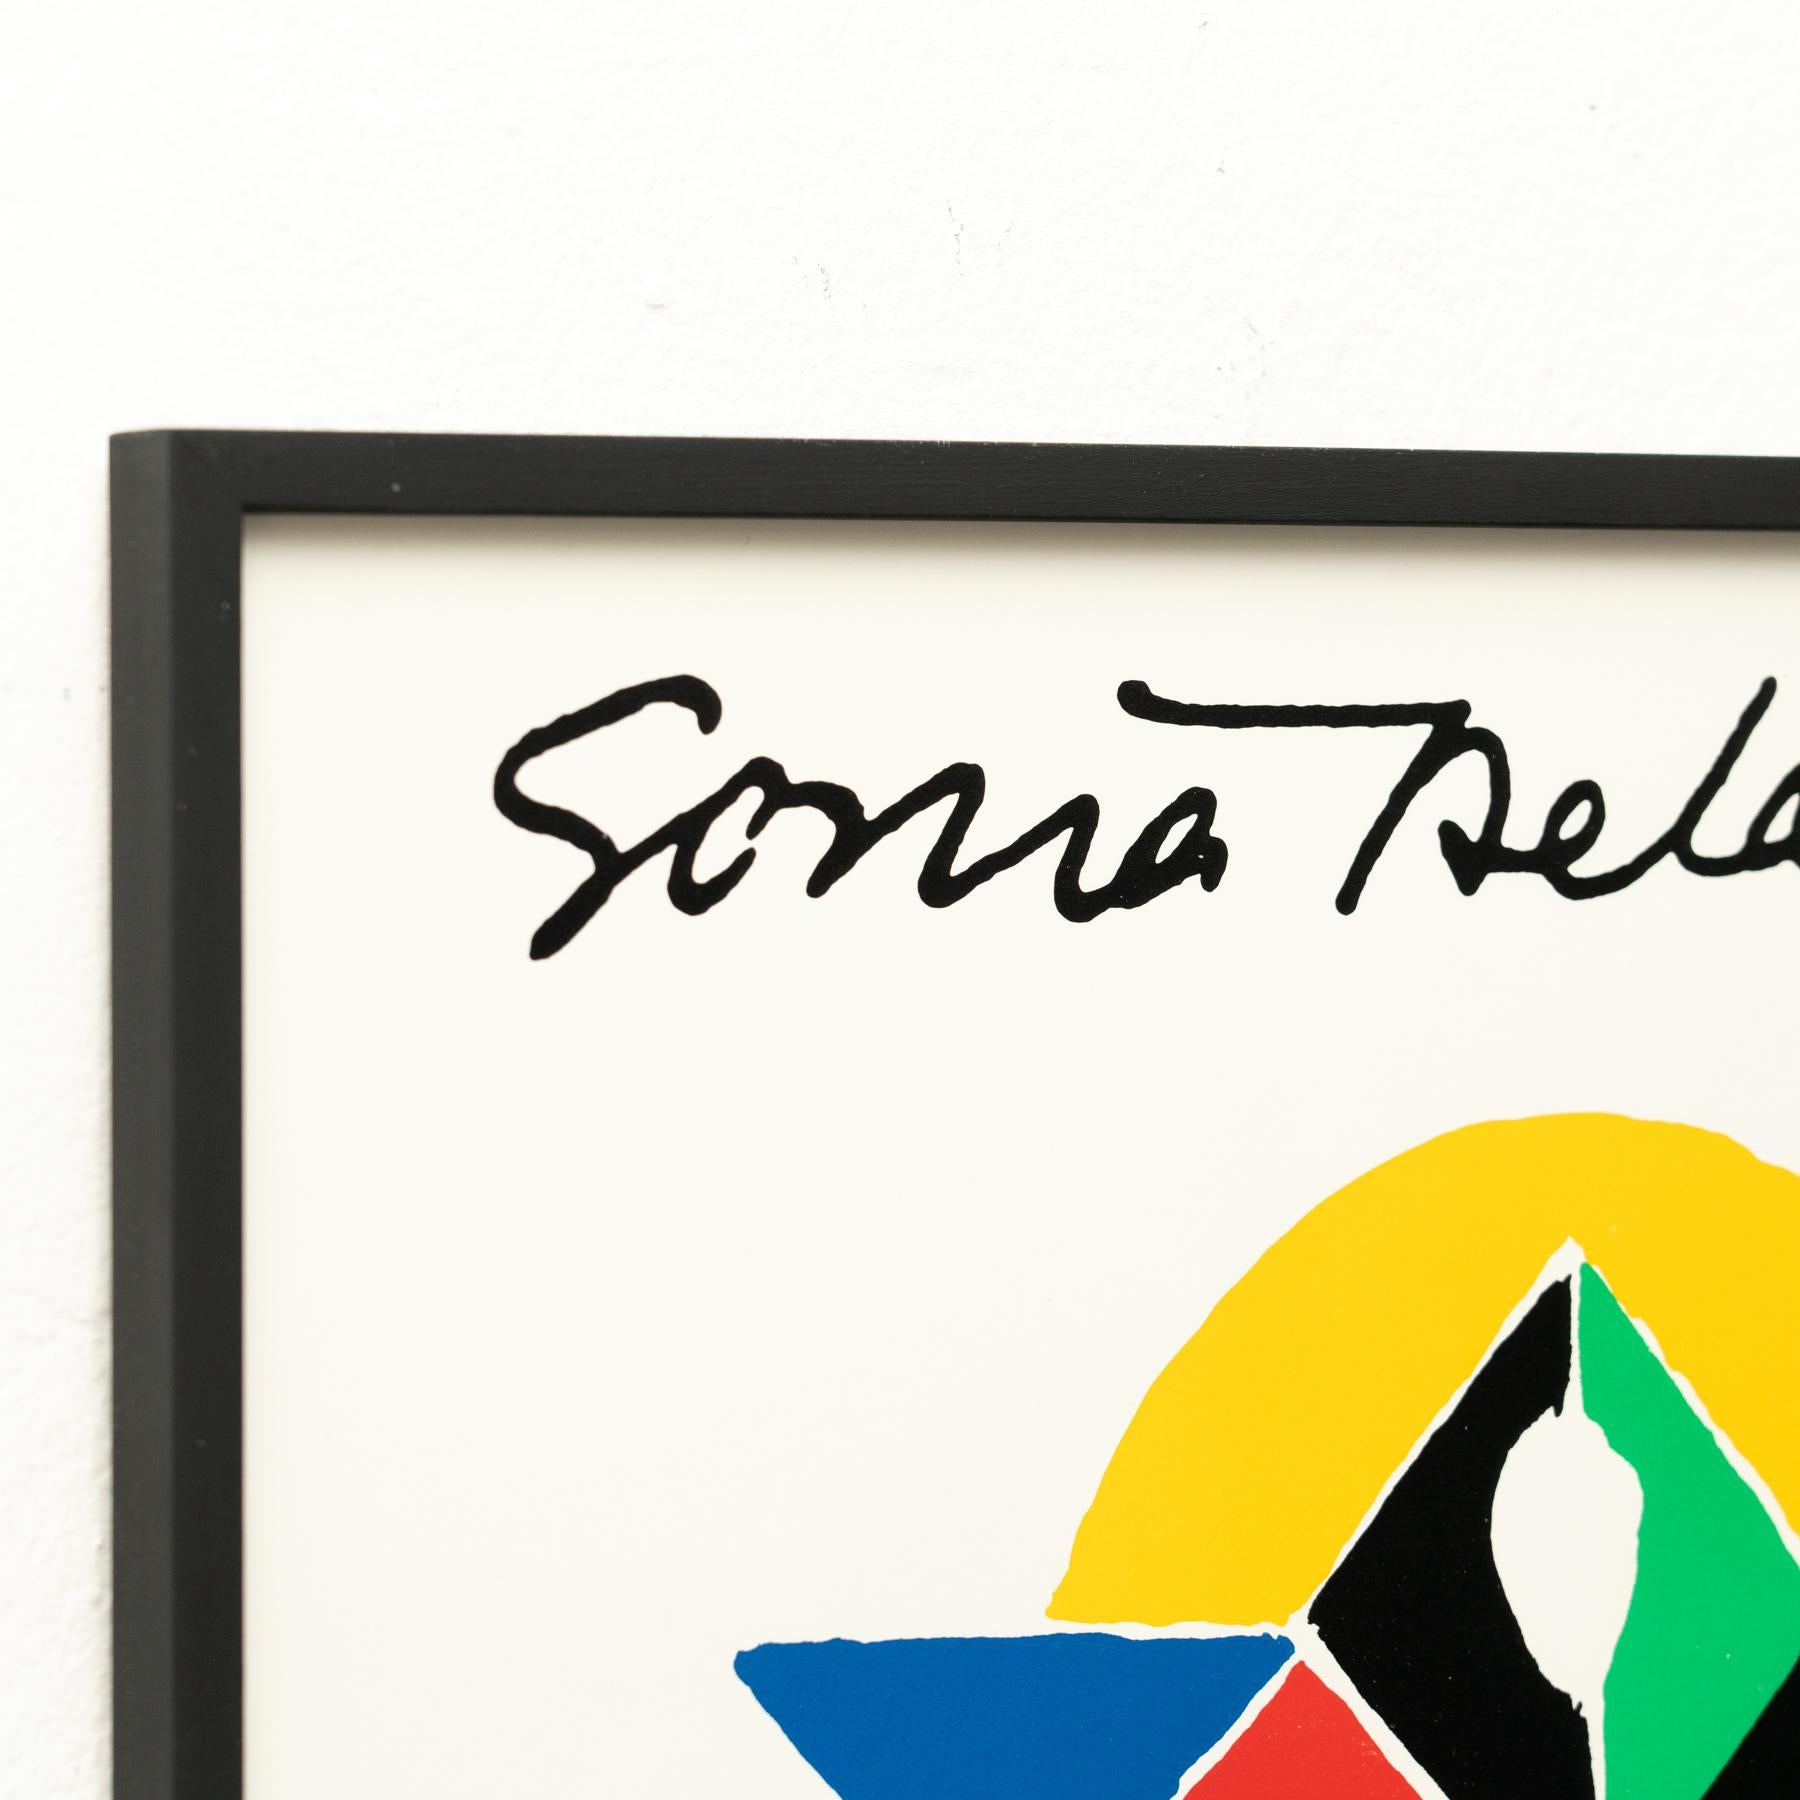 French Framed Sonia Delaunay Lithography For Sale